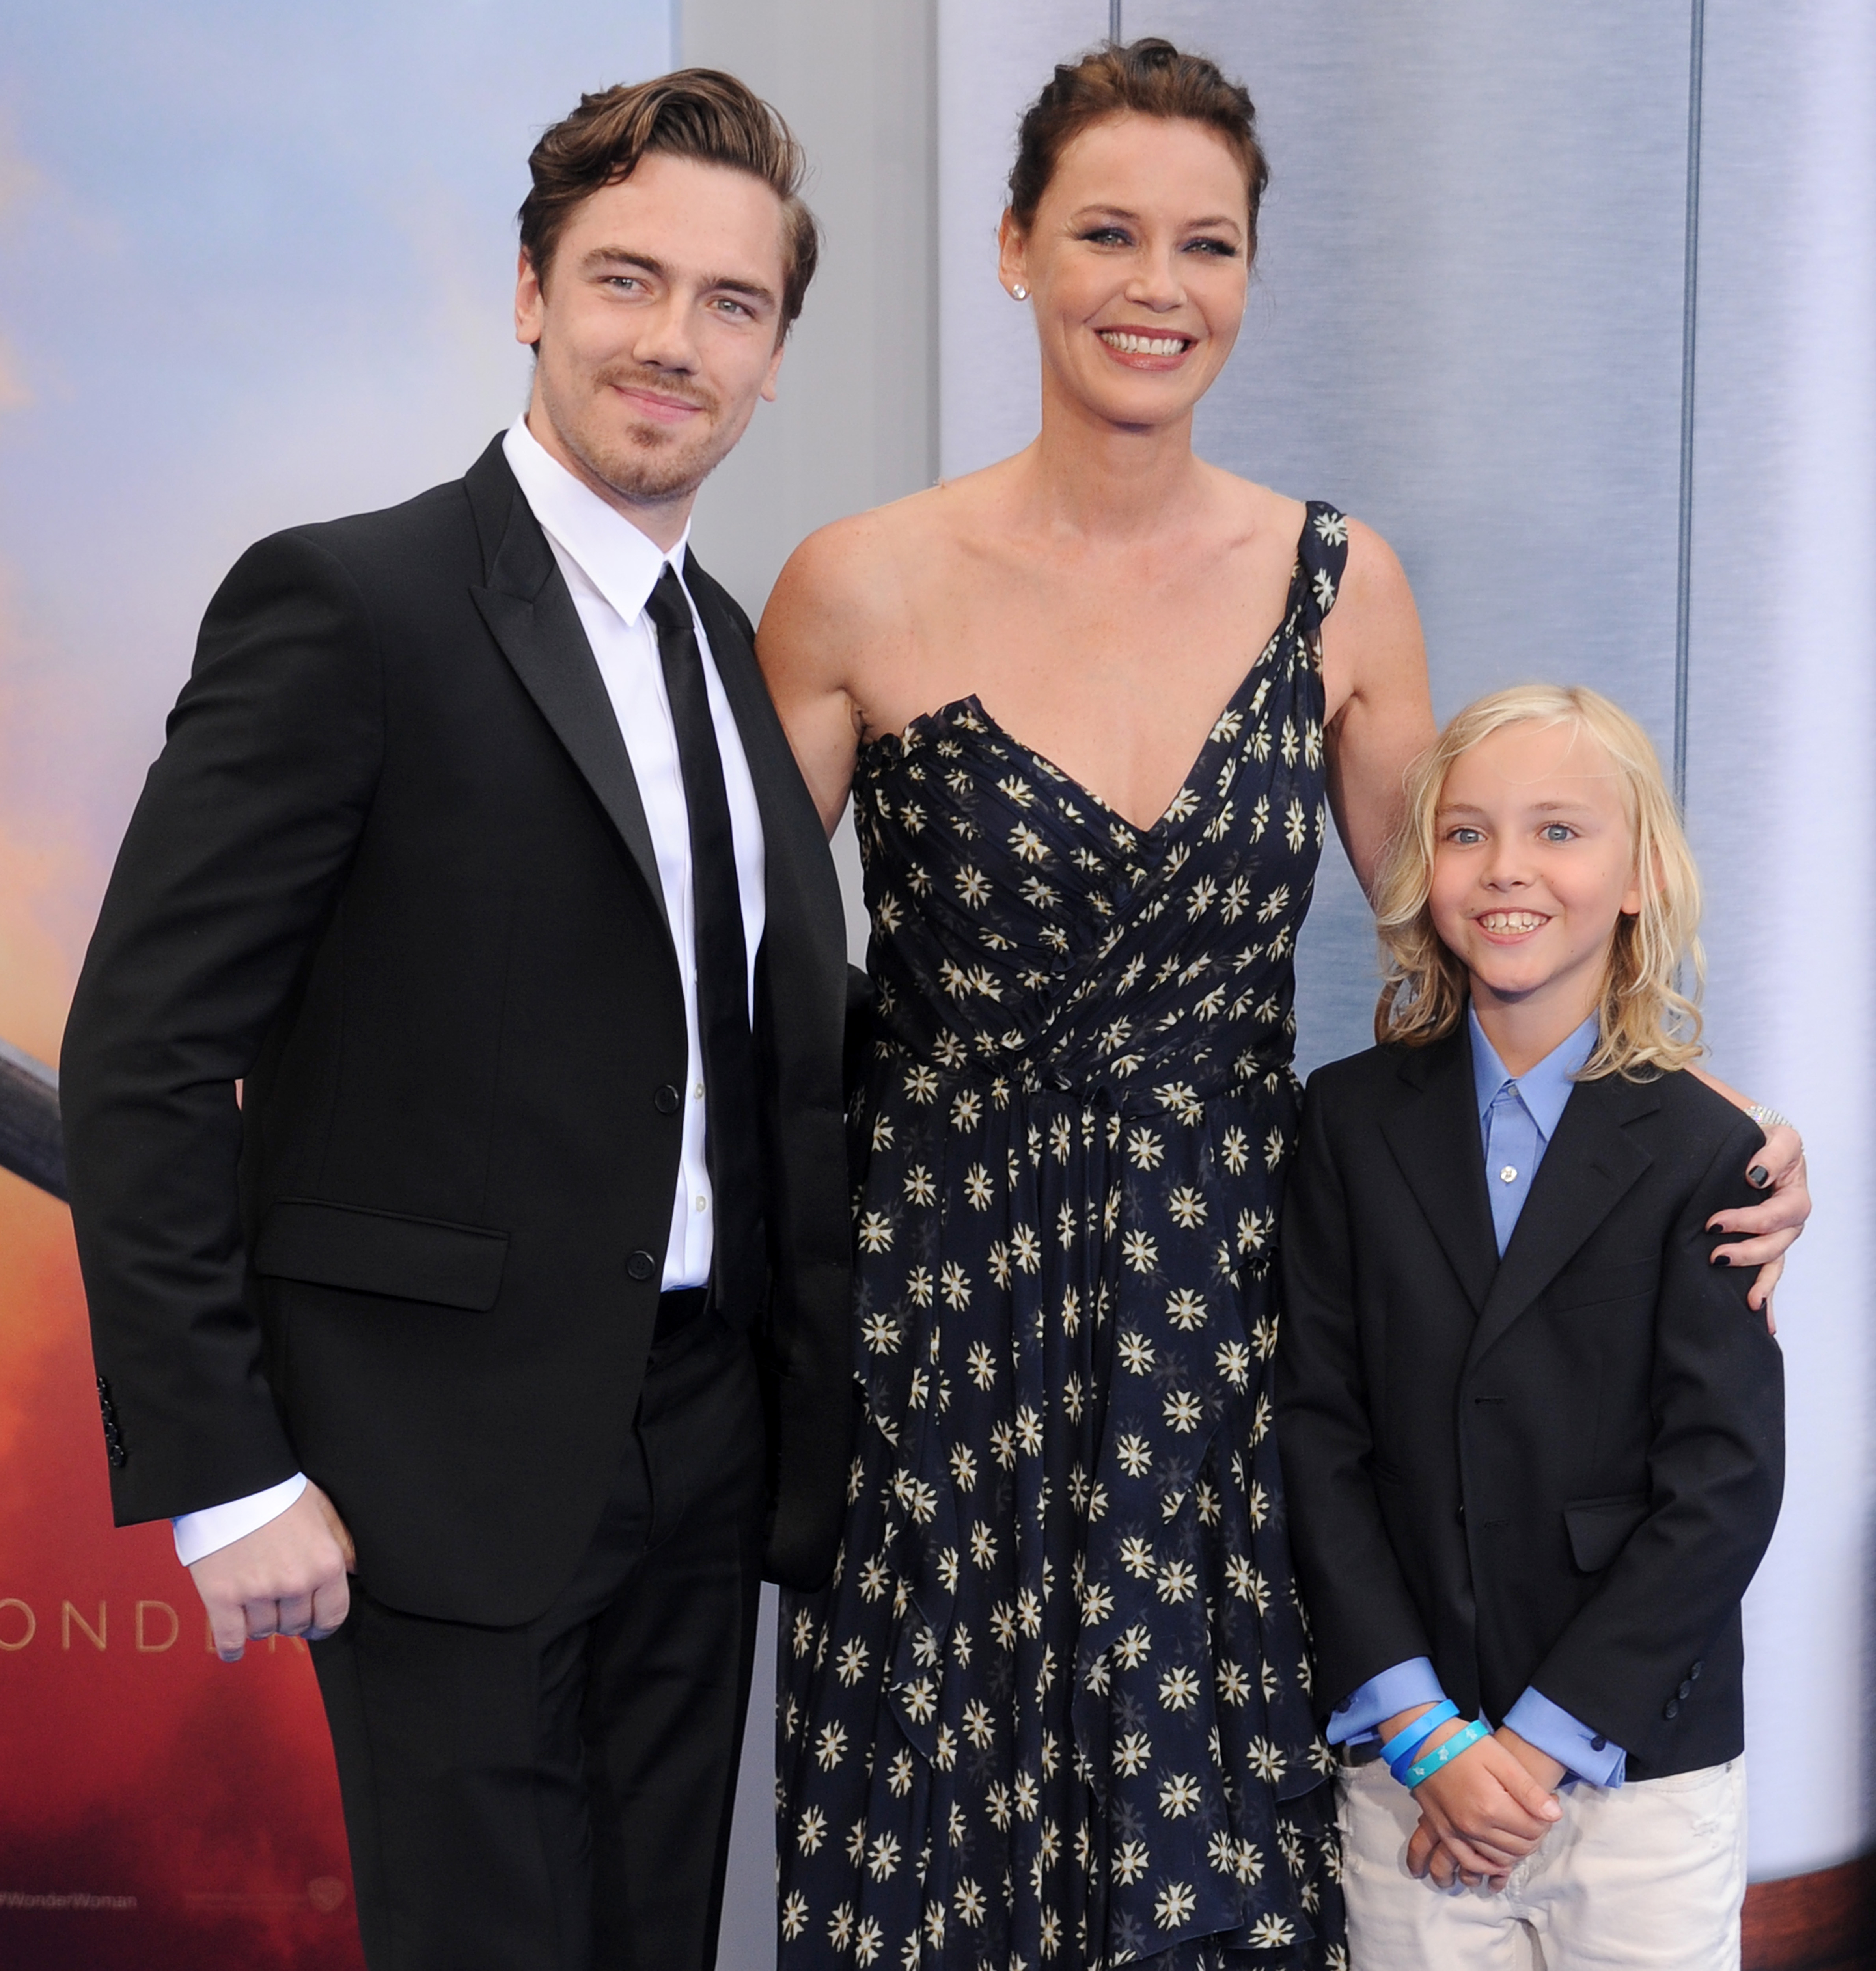 Sebastian Sartor, Connie Nielsen, and Bryce Thadeus Ulrich-Nielsen at the "Wonder Woman" premiere on May 25, 2017, in Hollywood, California. | Source: Getty Images